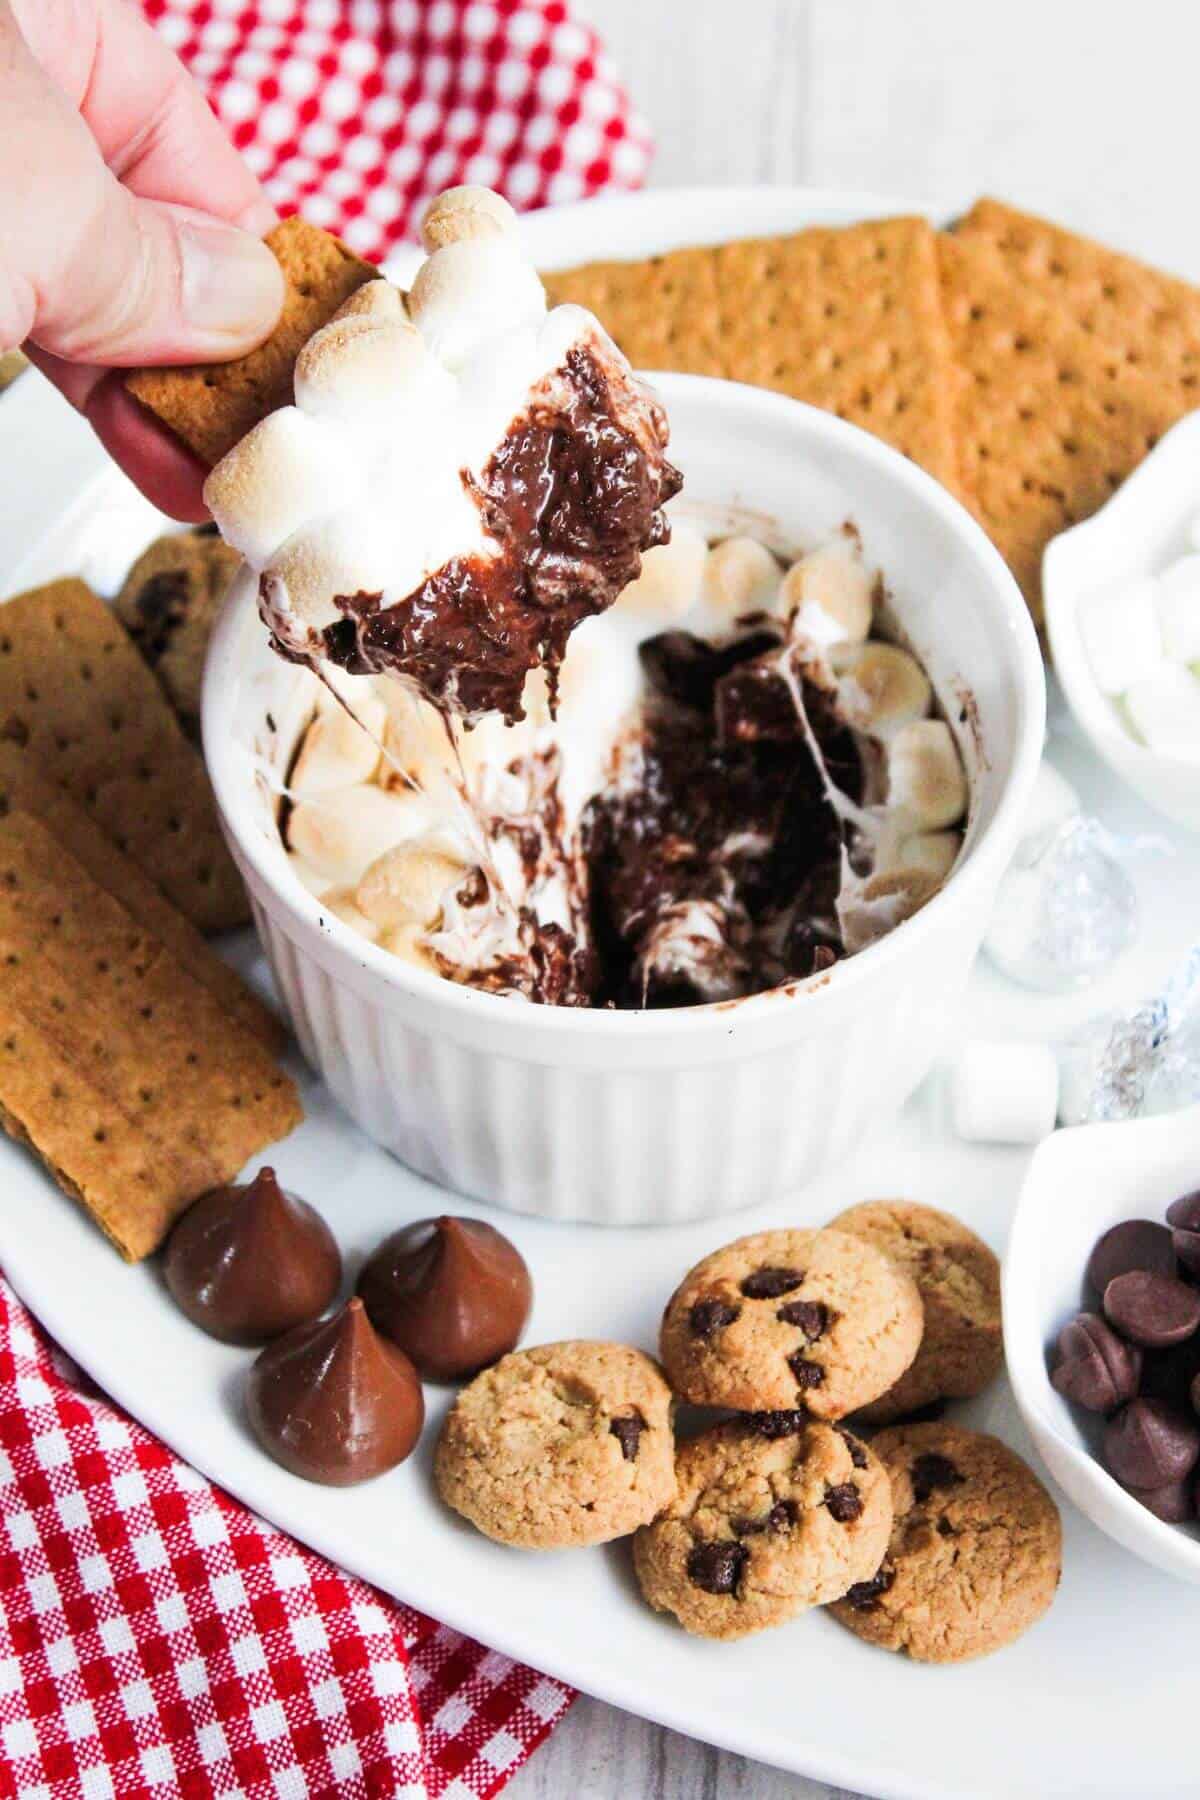 A person is dipping a graham cracker into a bowl of chocolate smores dip.